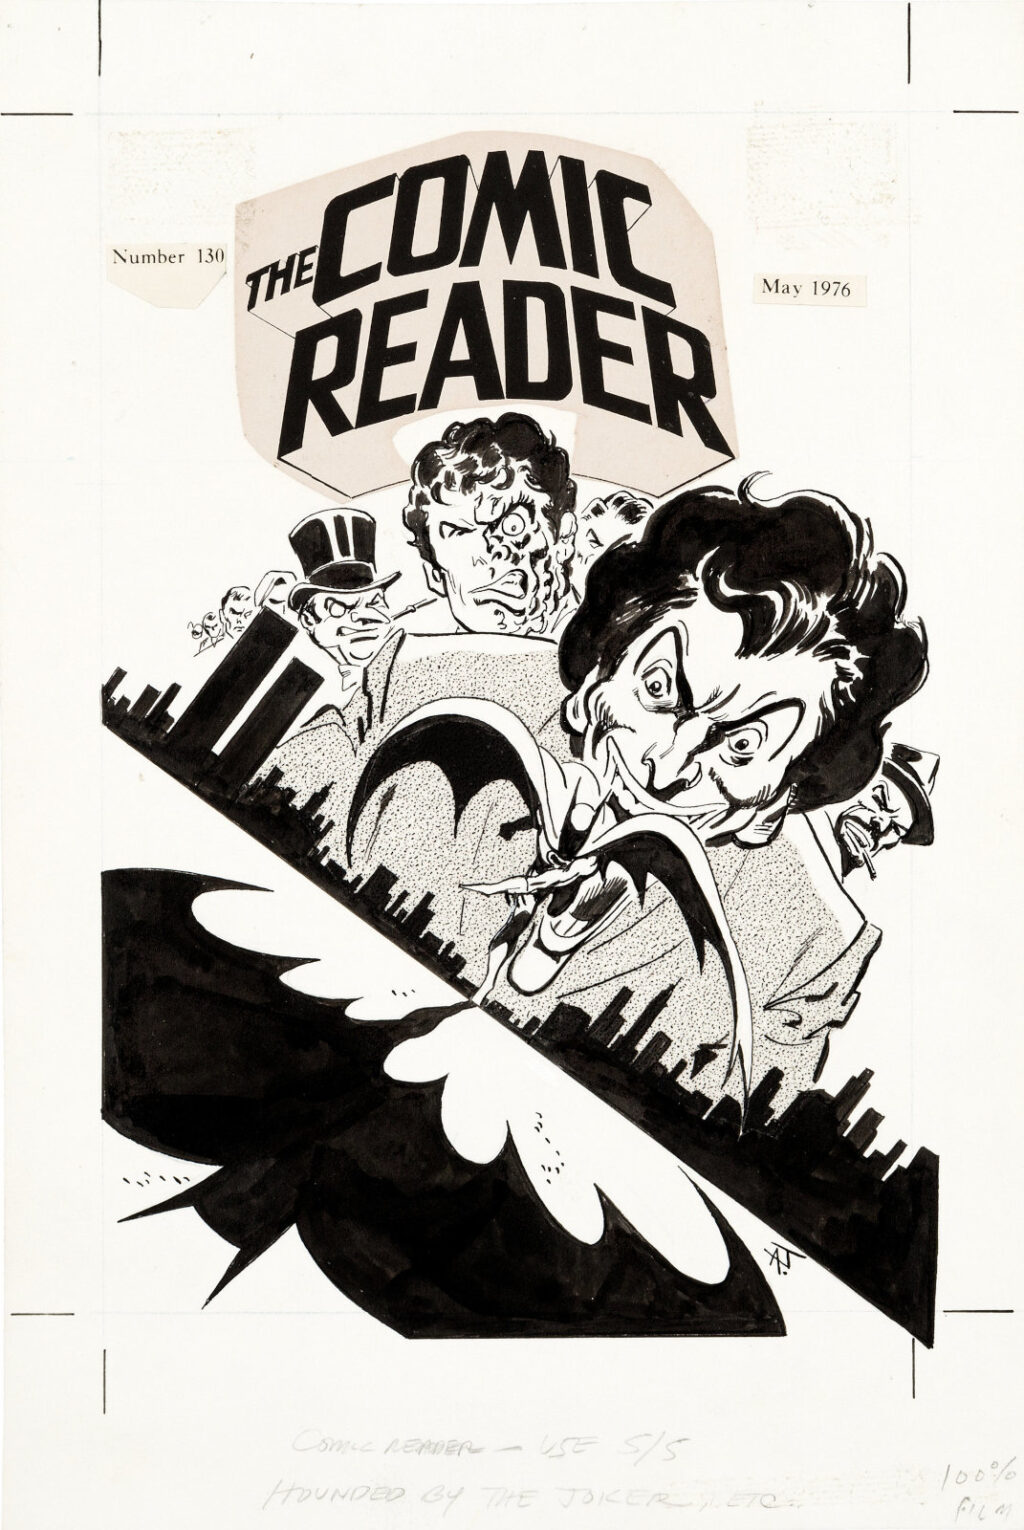 The Comic Reader issue 130 cover by Jim Aparo